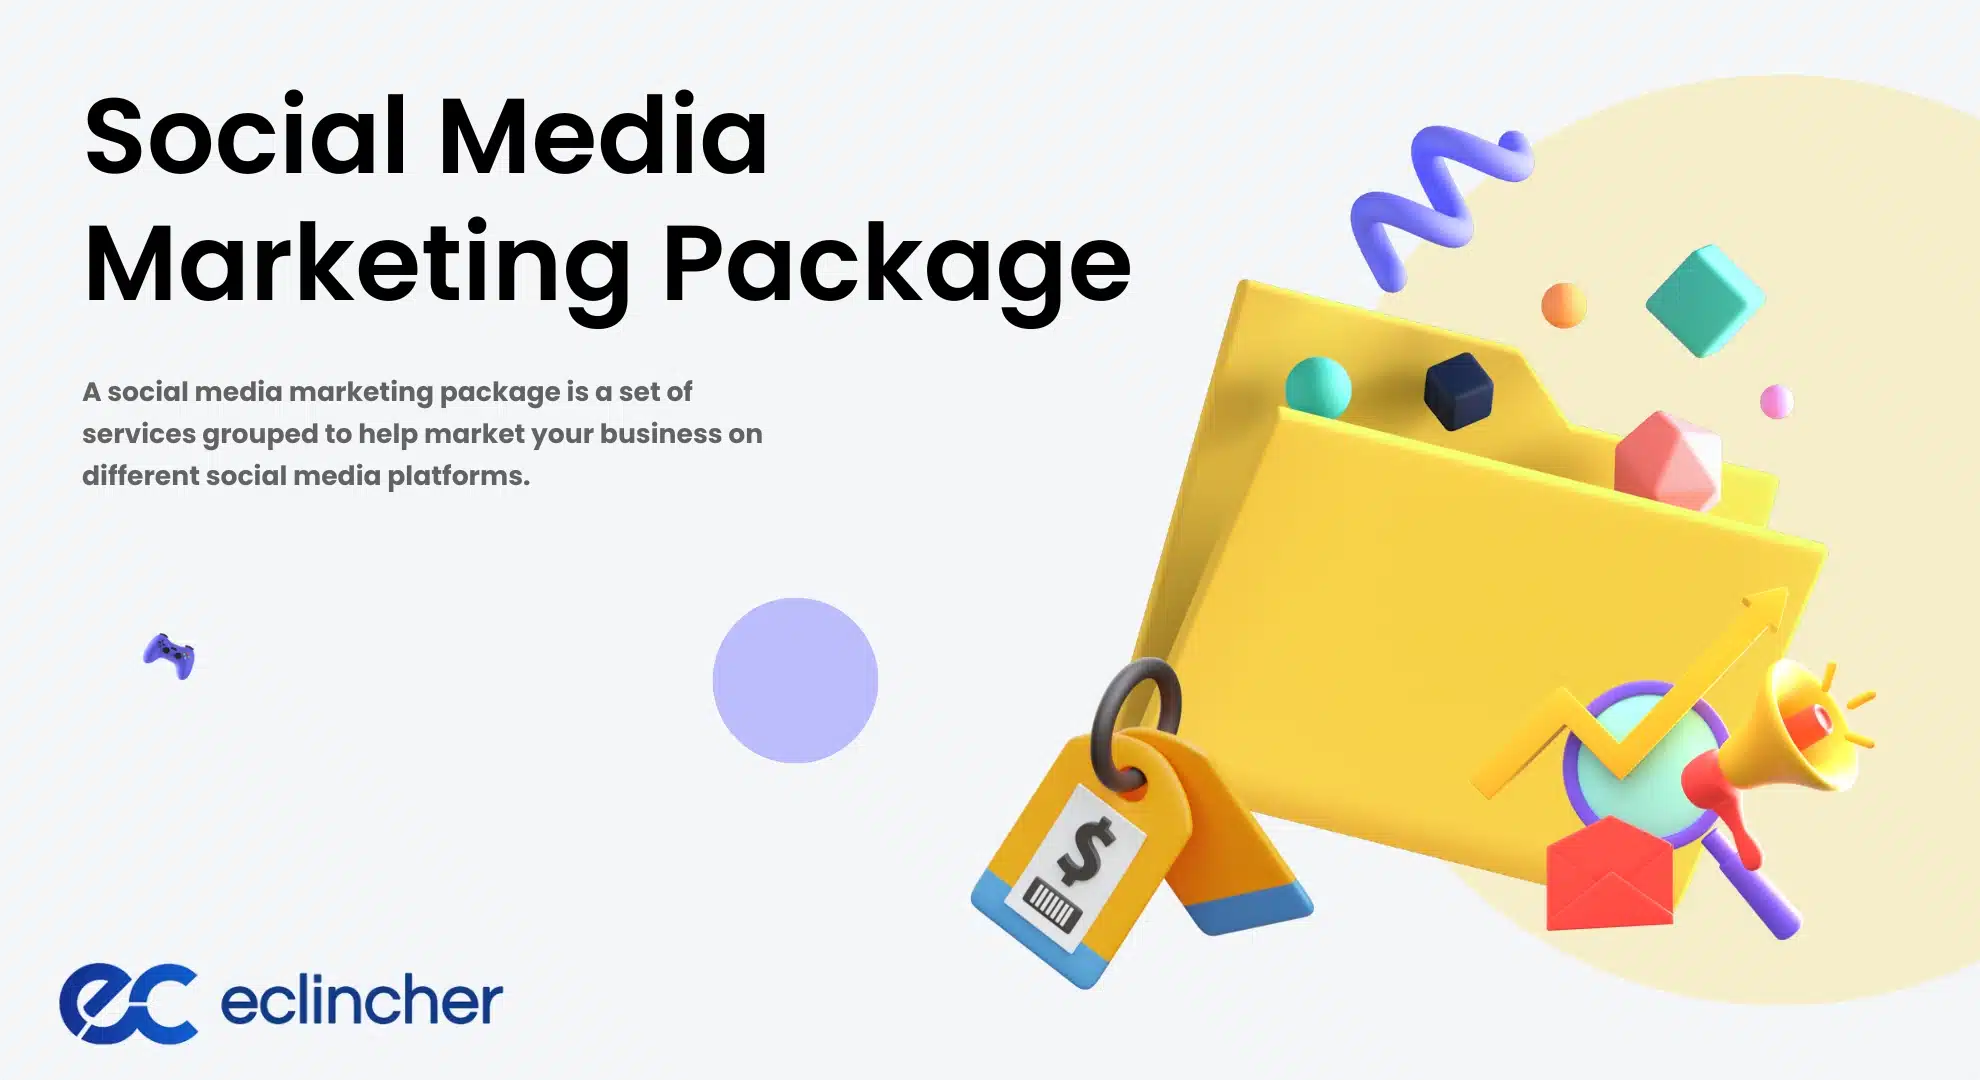 What is a Social Media Marketing Package